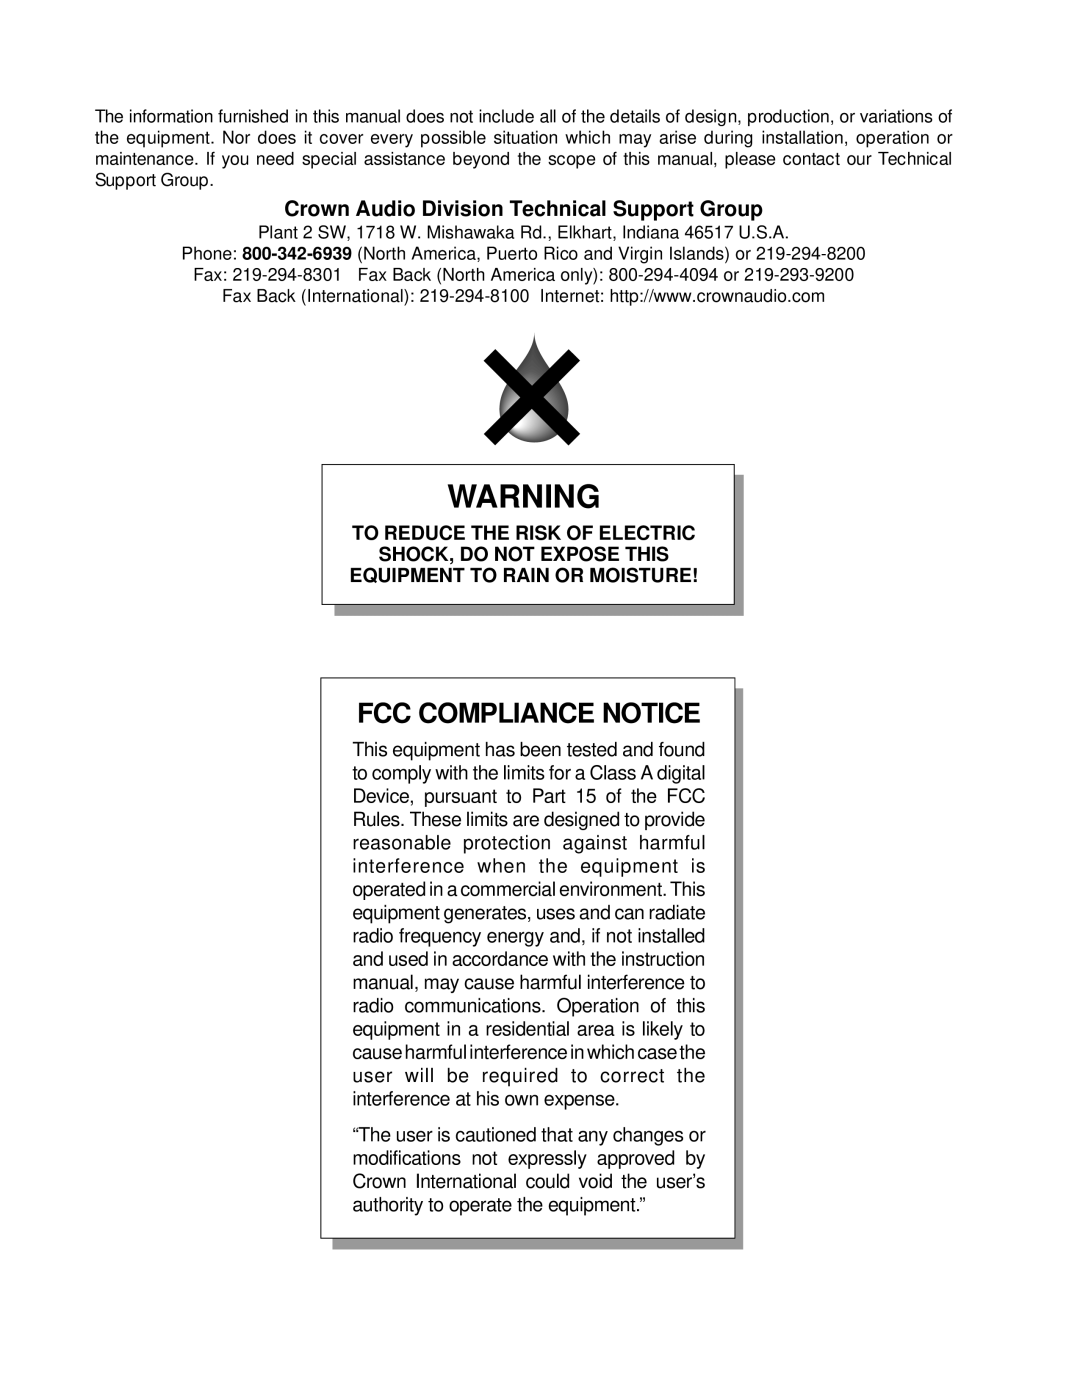 Crown Audio IQ P.I.P.-DSP manual Crown Audio Division Technical Support Group, Fcc Compliance Notice 